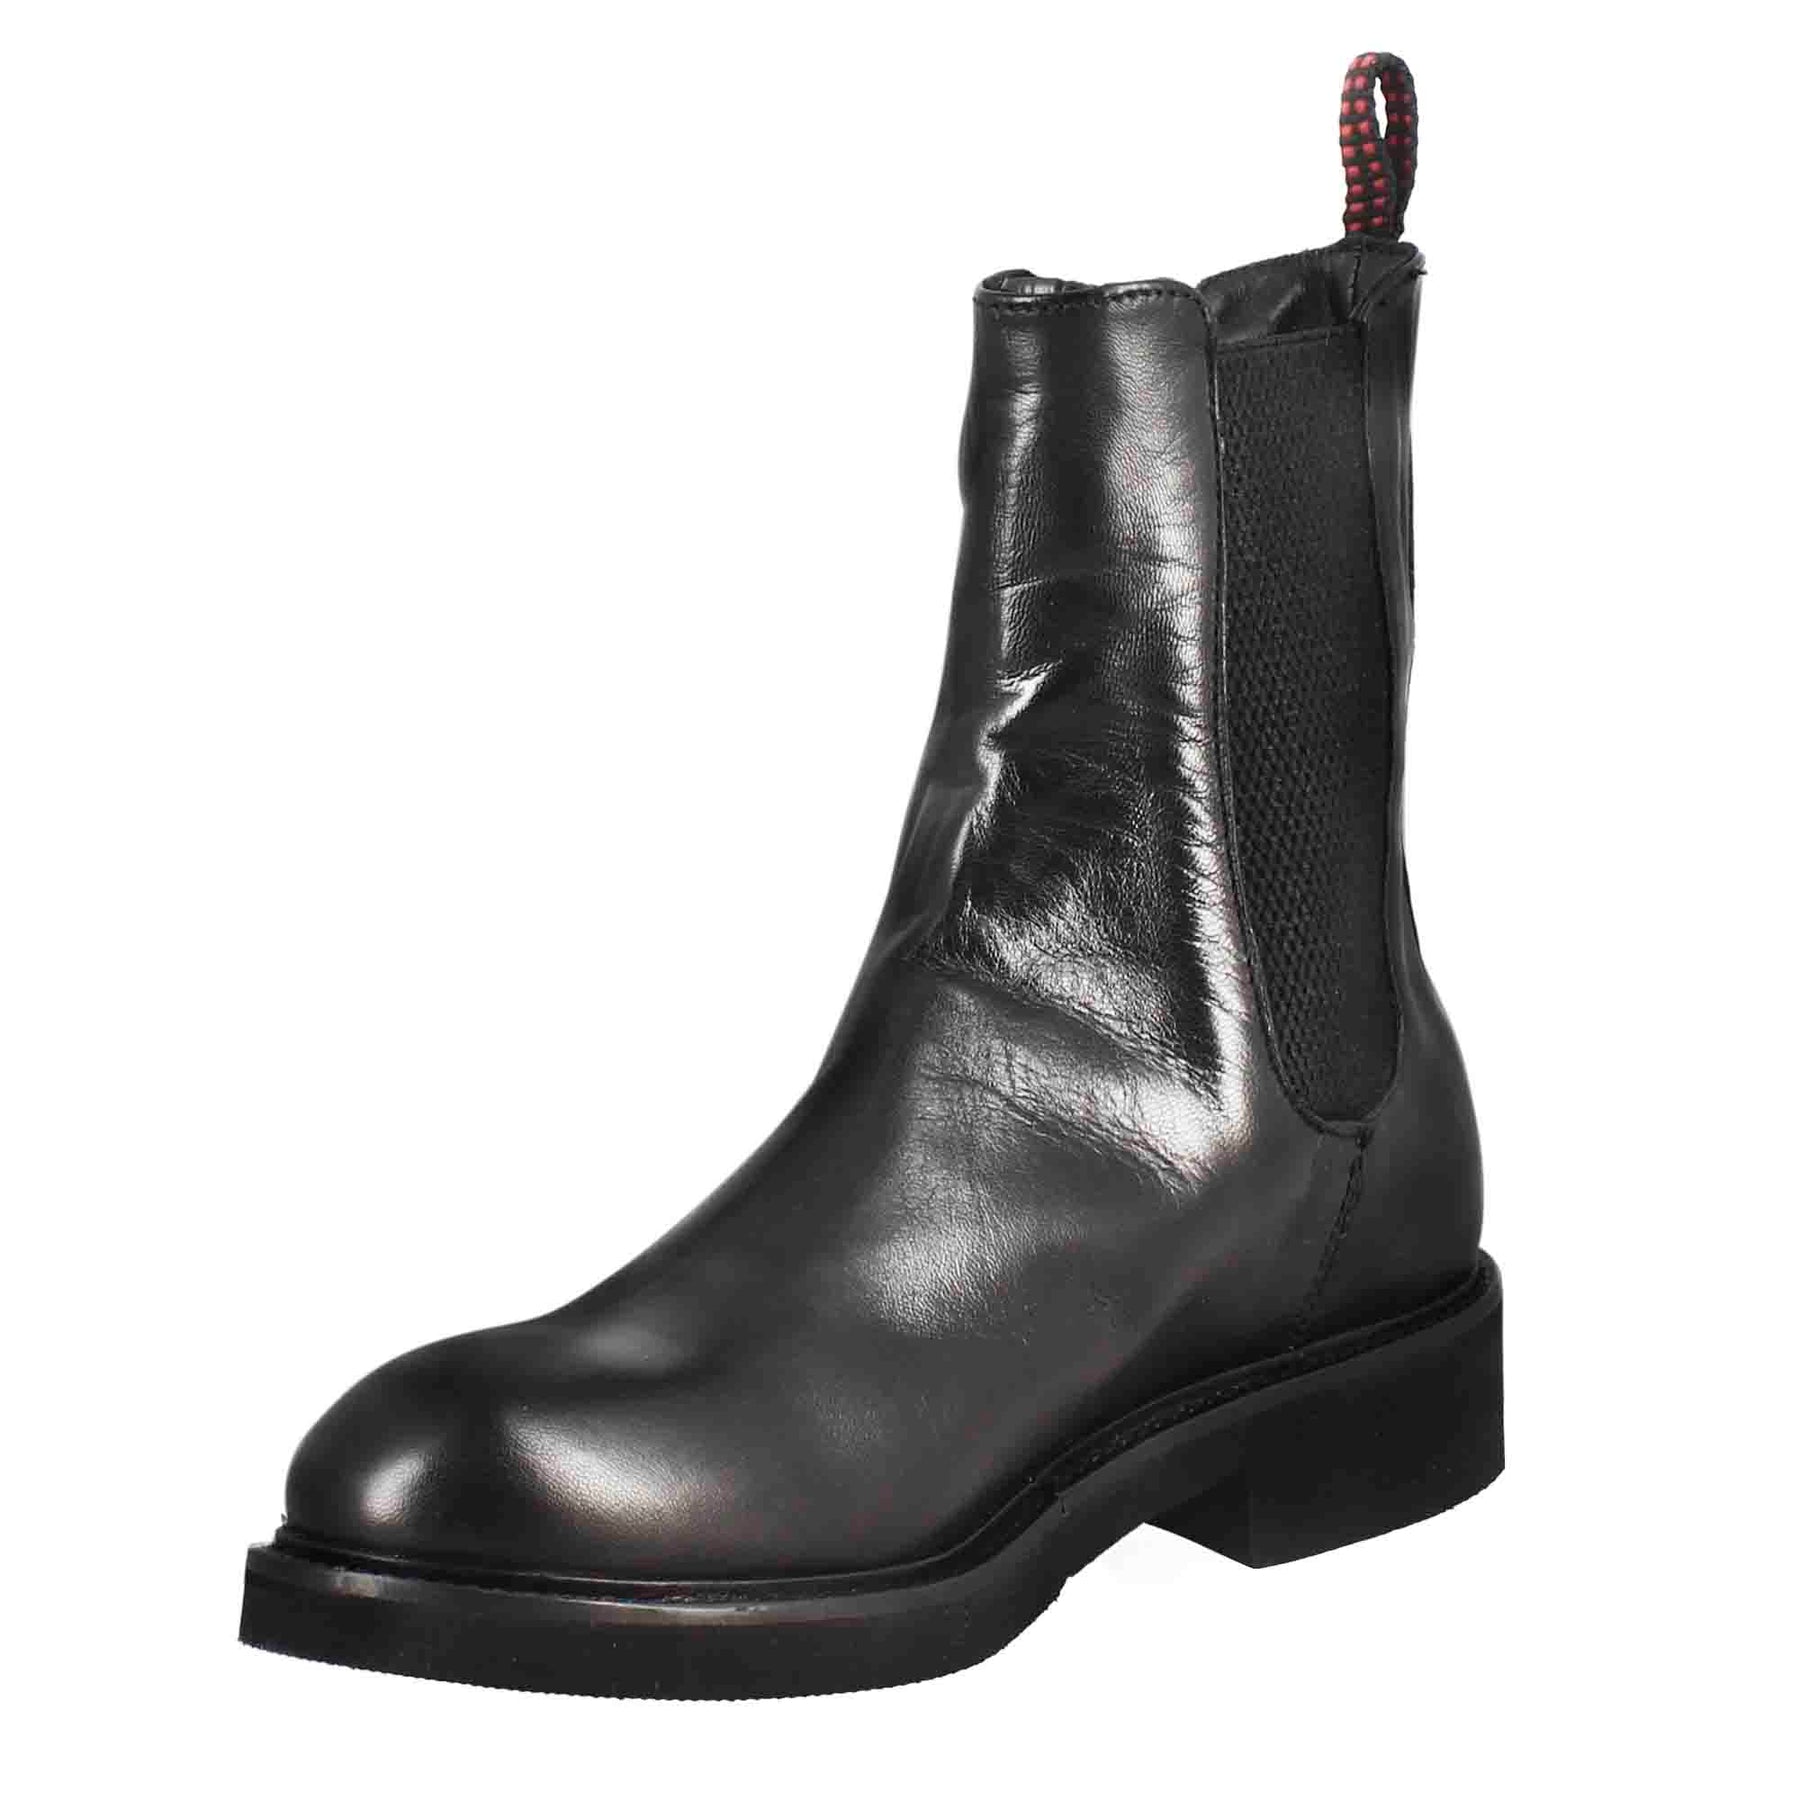 Paupa women's chelsea boot in black washed leather